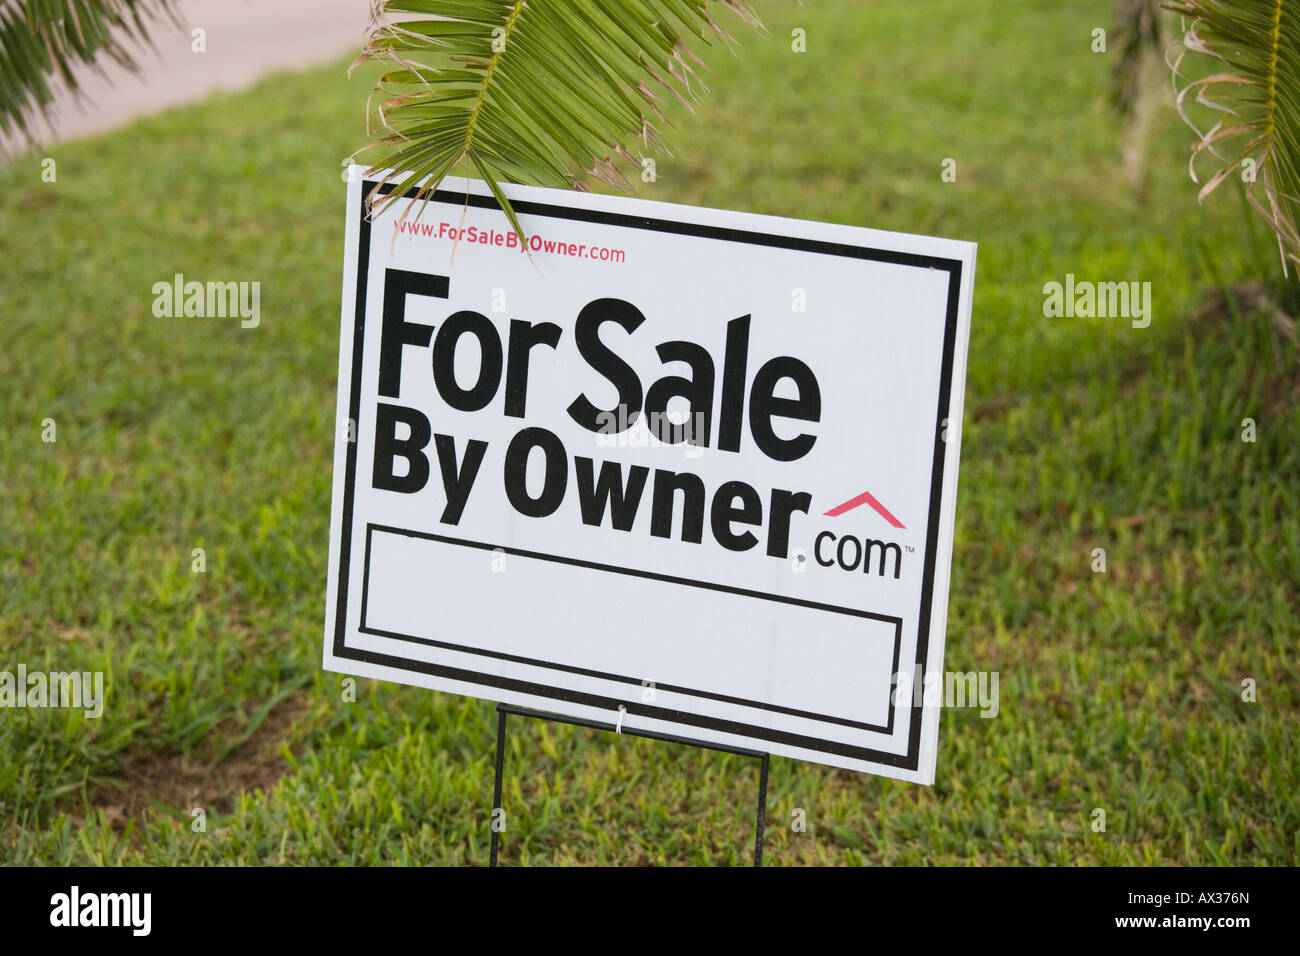 For sale by owner sign US USA Stock Photo